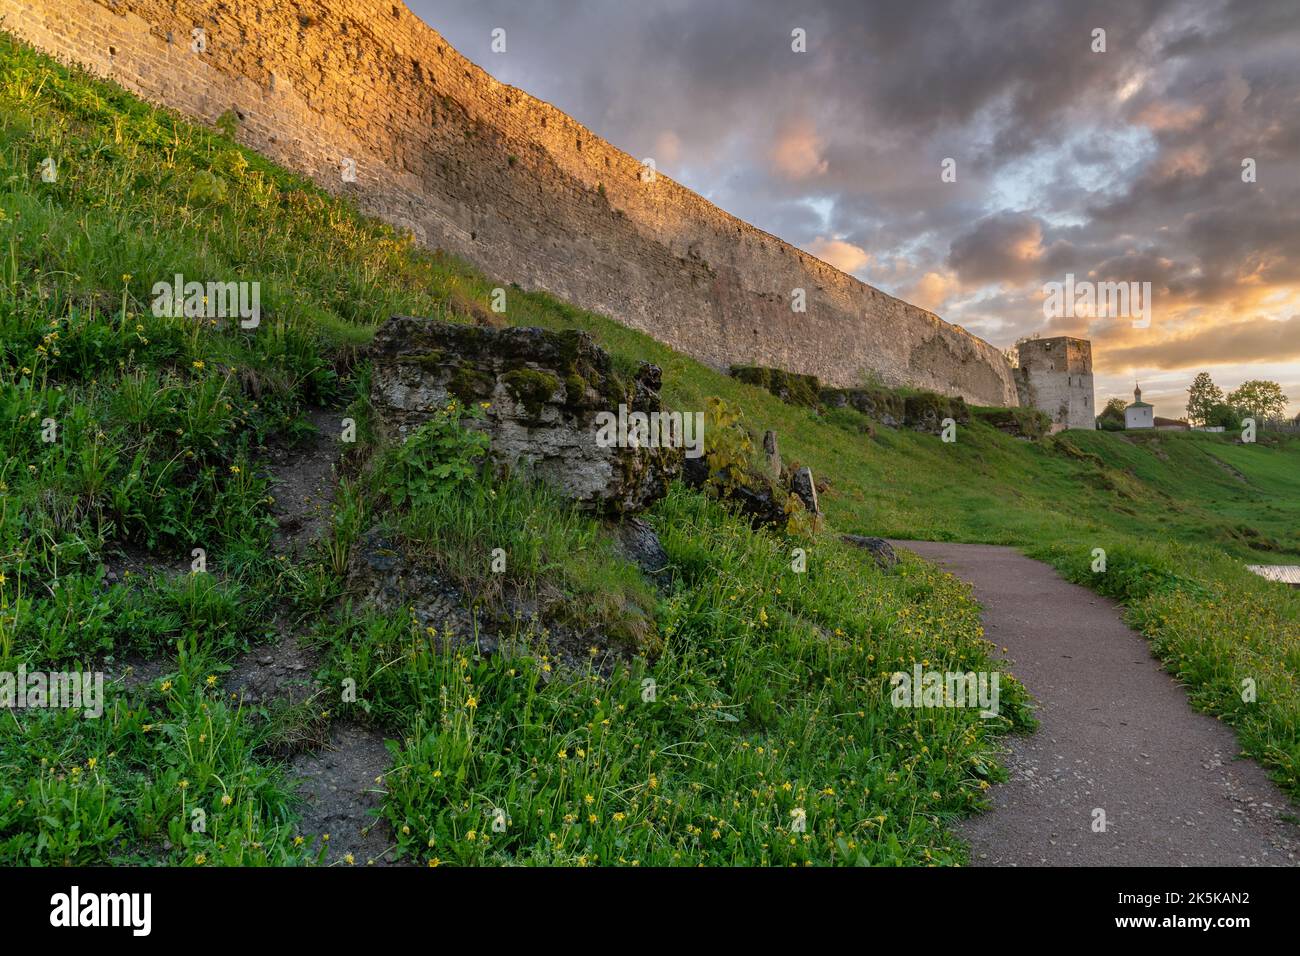 A view of the Izborsk fortress, Pskov region,Russia. Stock Photo